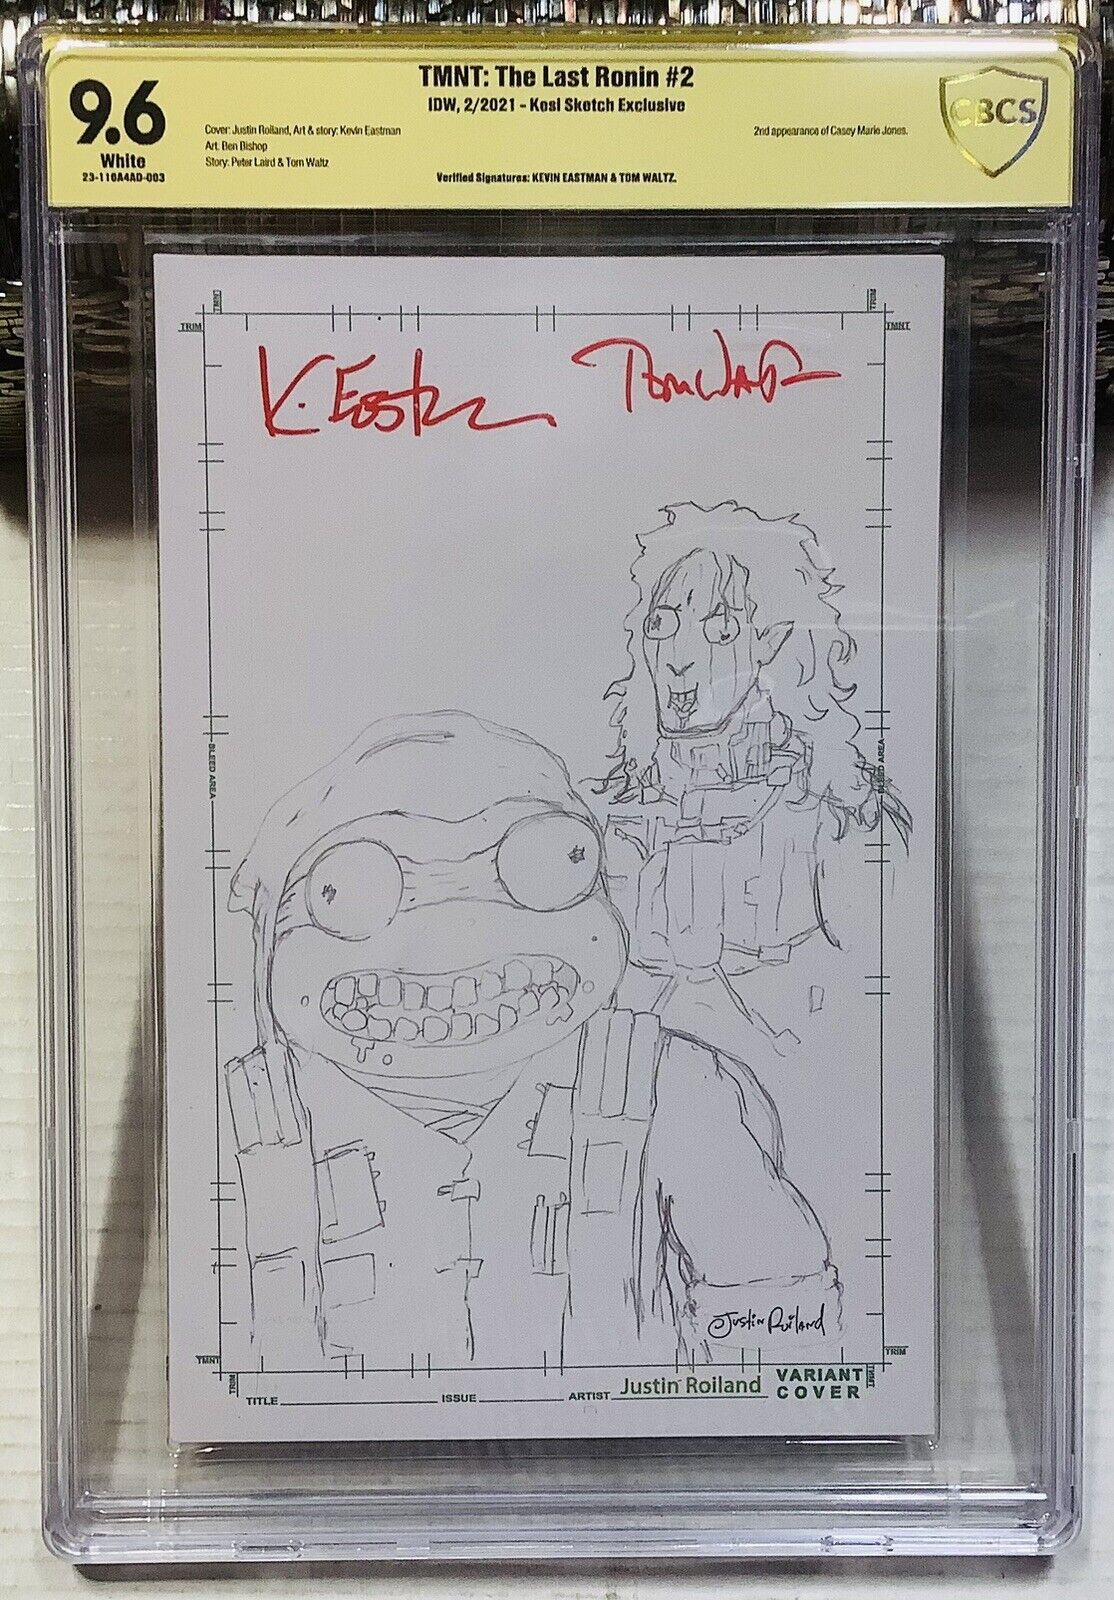 CBCS 9.6 TMNT THE LAST RONIN #2 SIGNED KEVIN EASTMAN & WALTZ ROILAND PENCIL